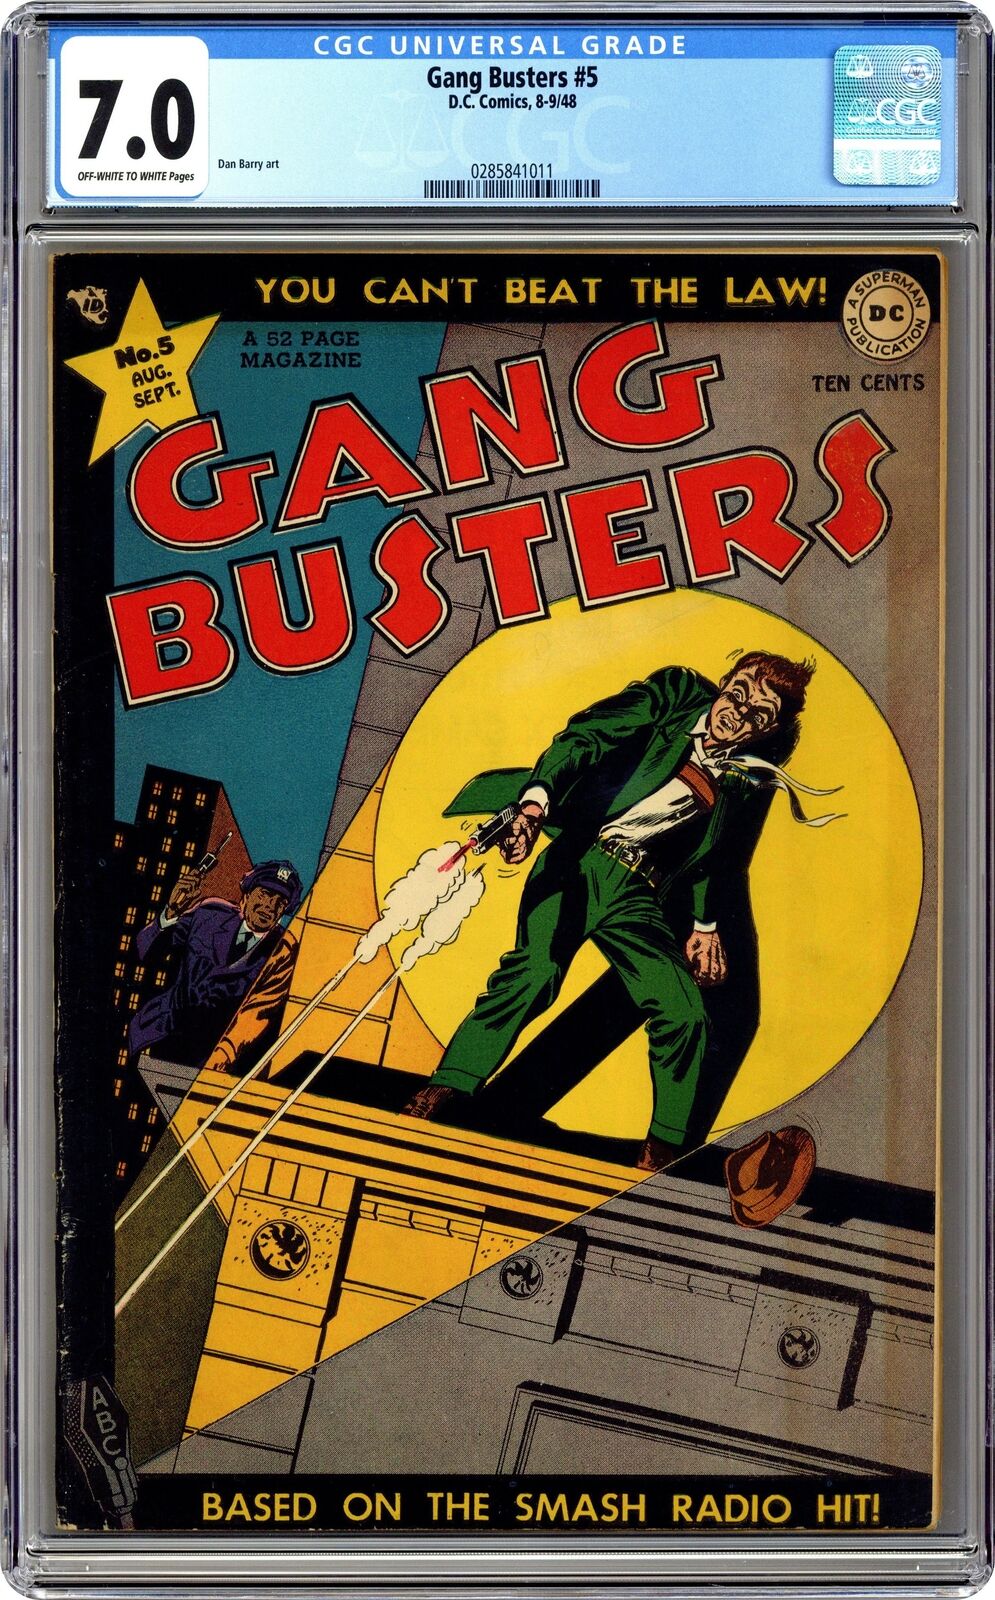 Gang Busters #5 CGC 7.0 1948 0285841011